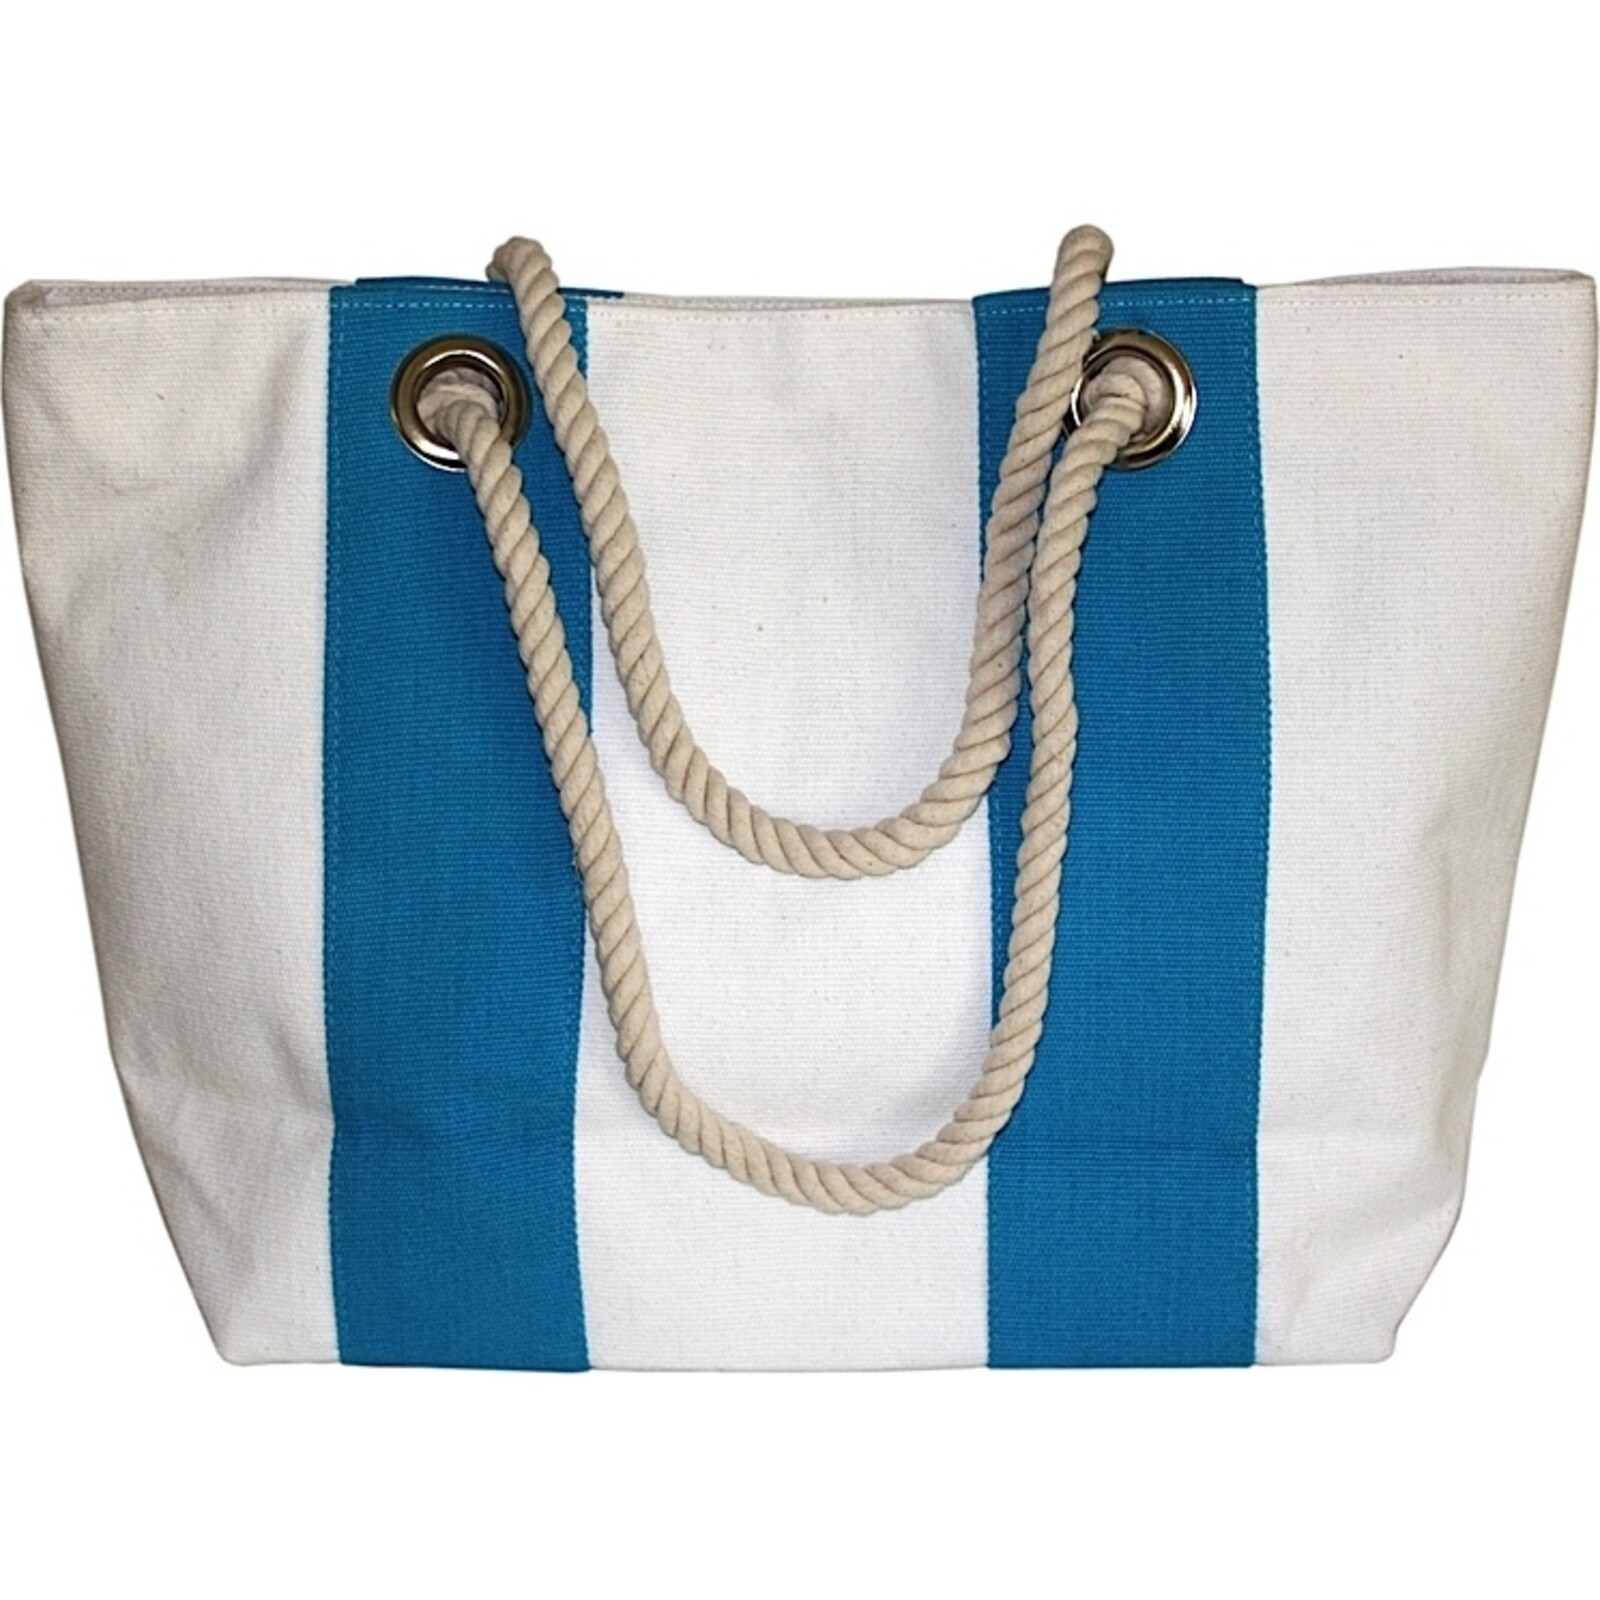 Beach Bag - Doby Stripe Large - Turquoise